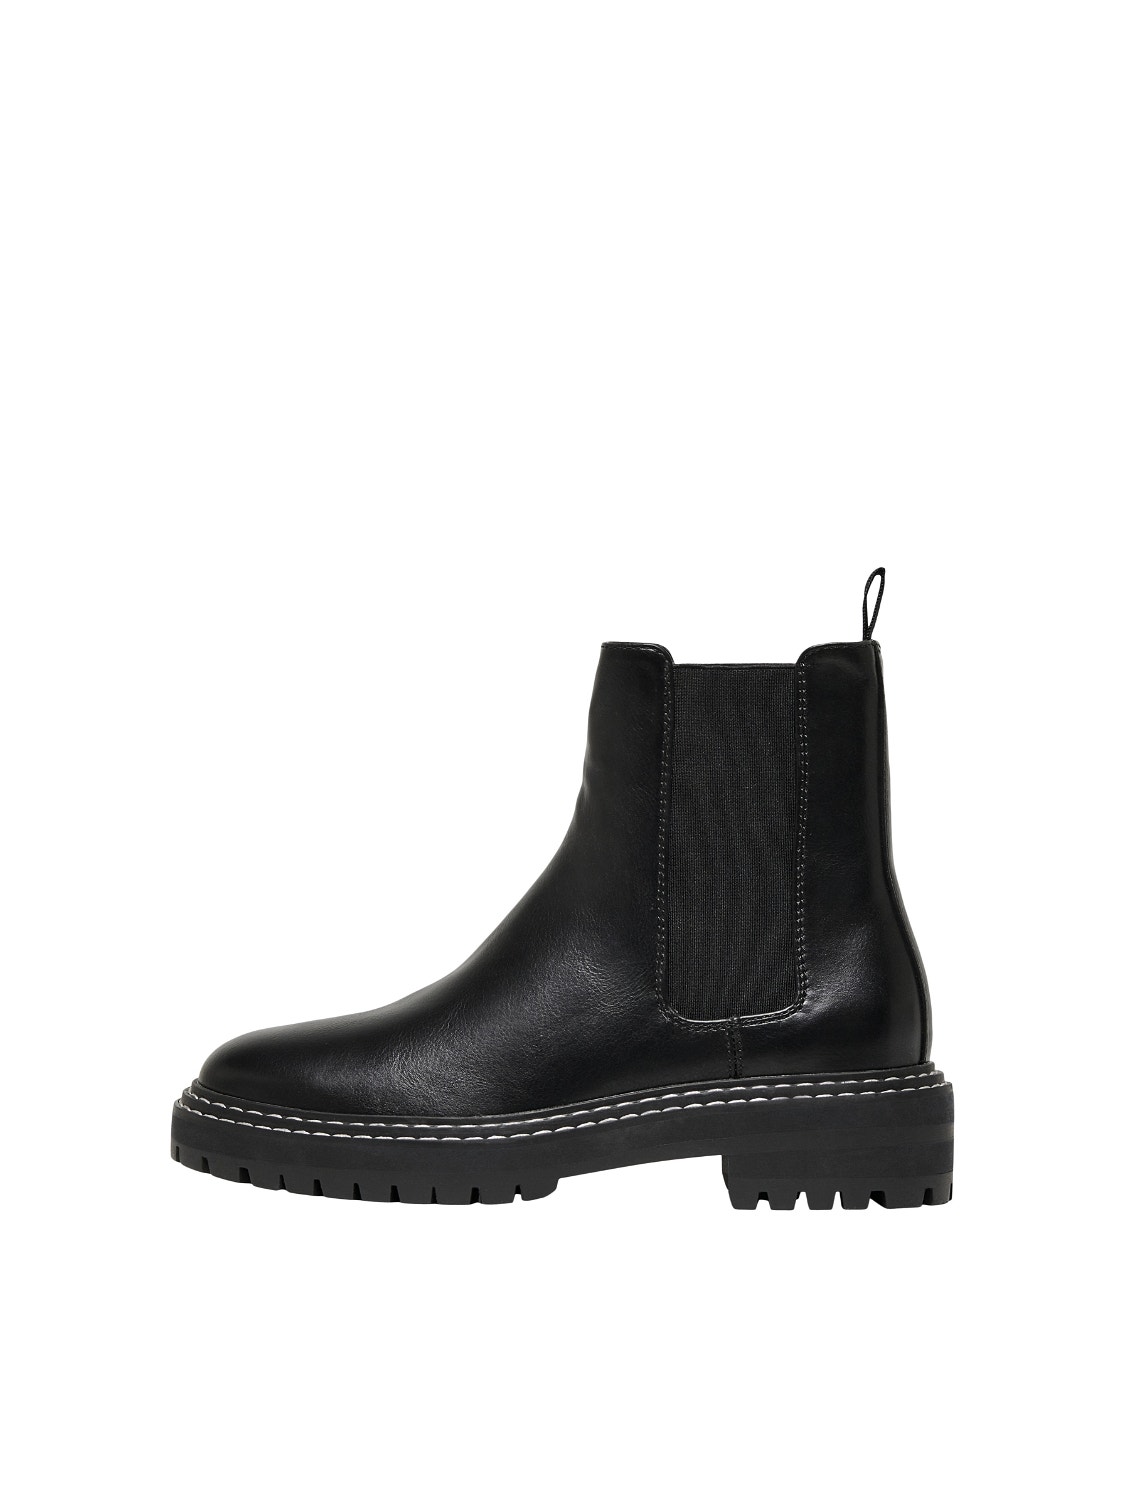 ONLY Round toe Boots -Black - 15238755